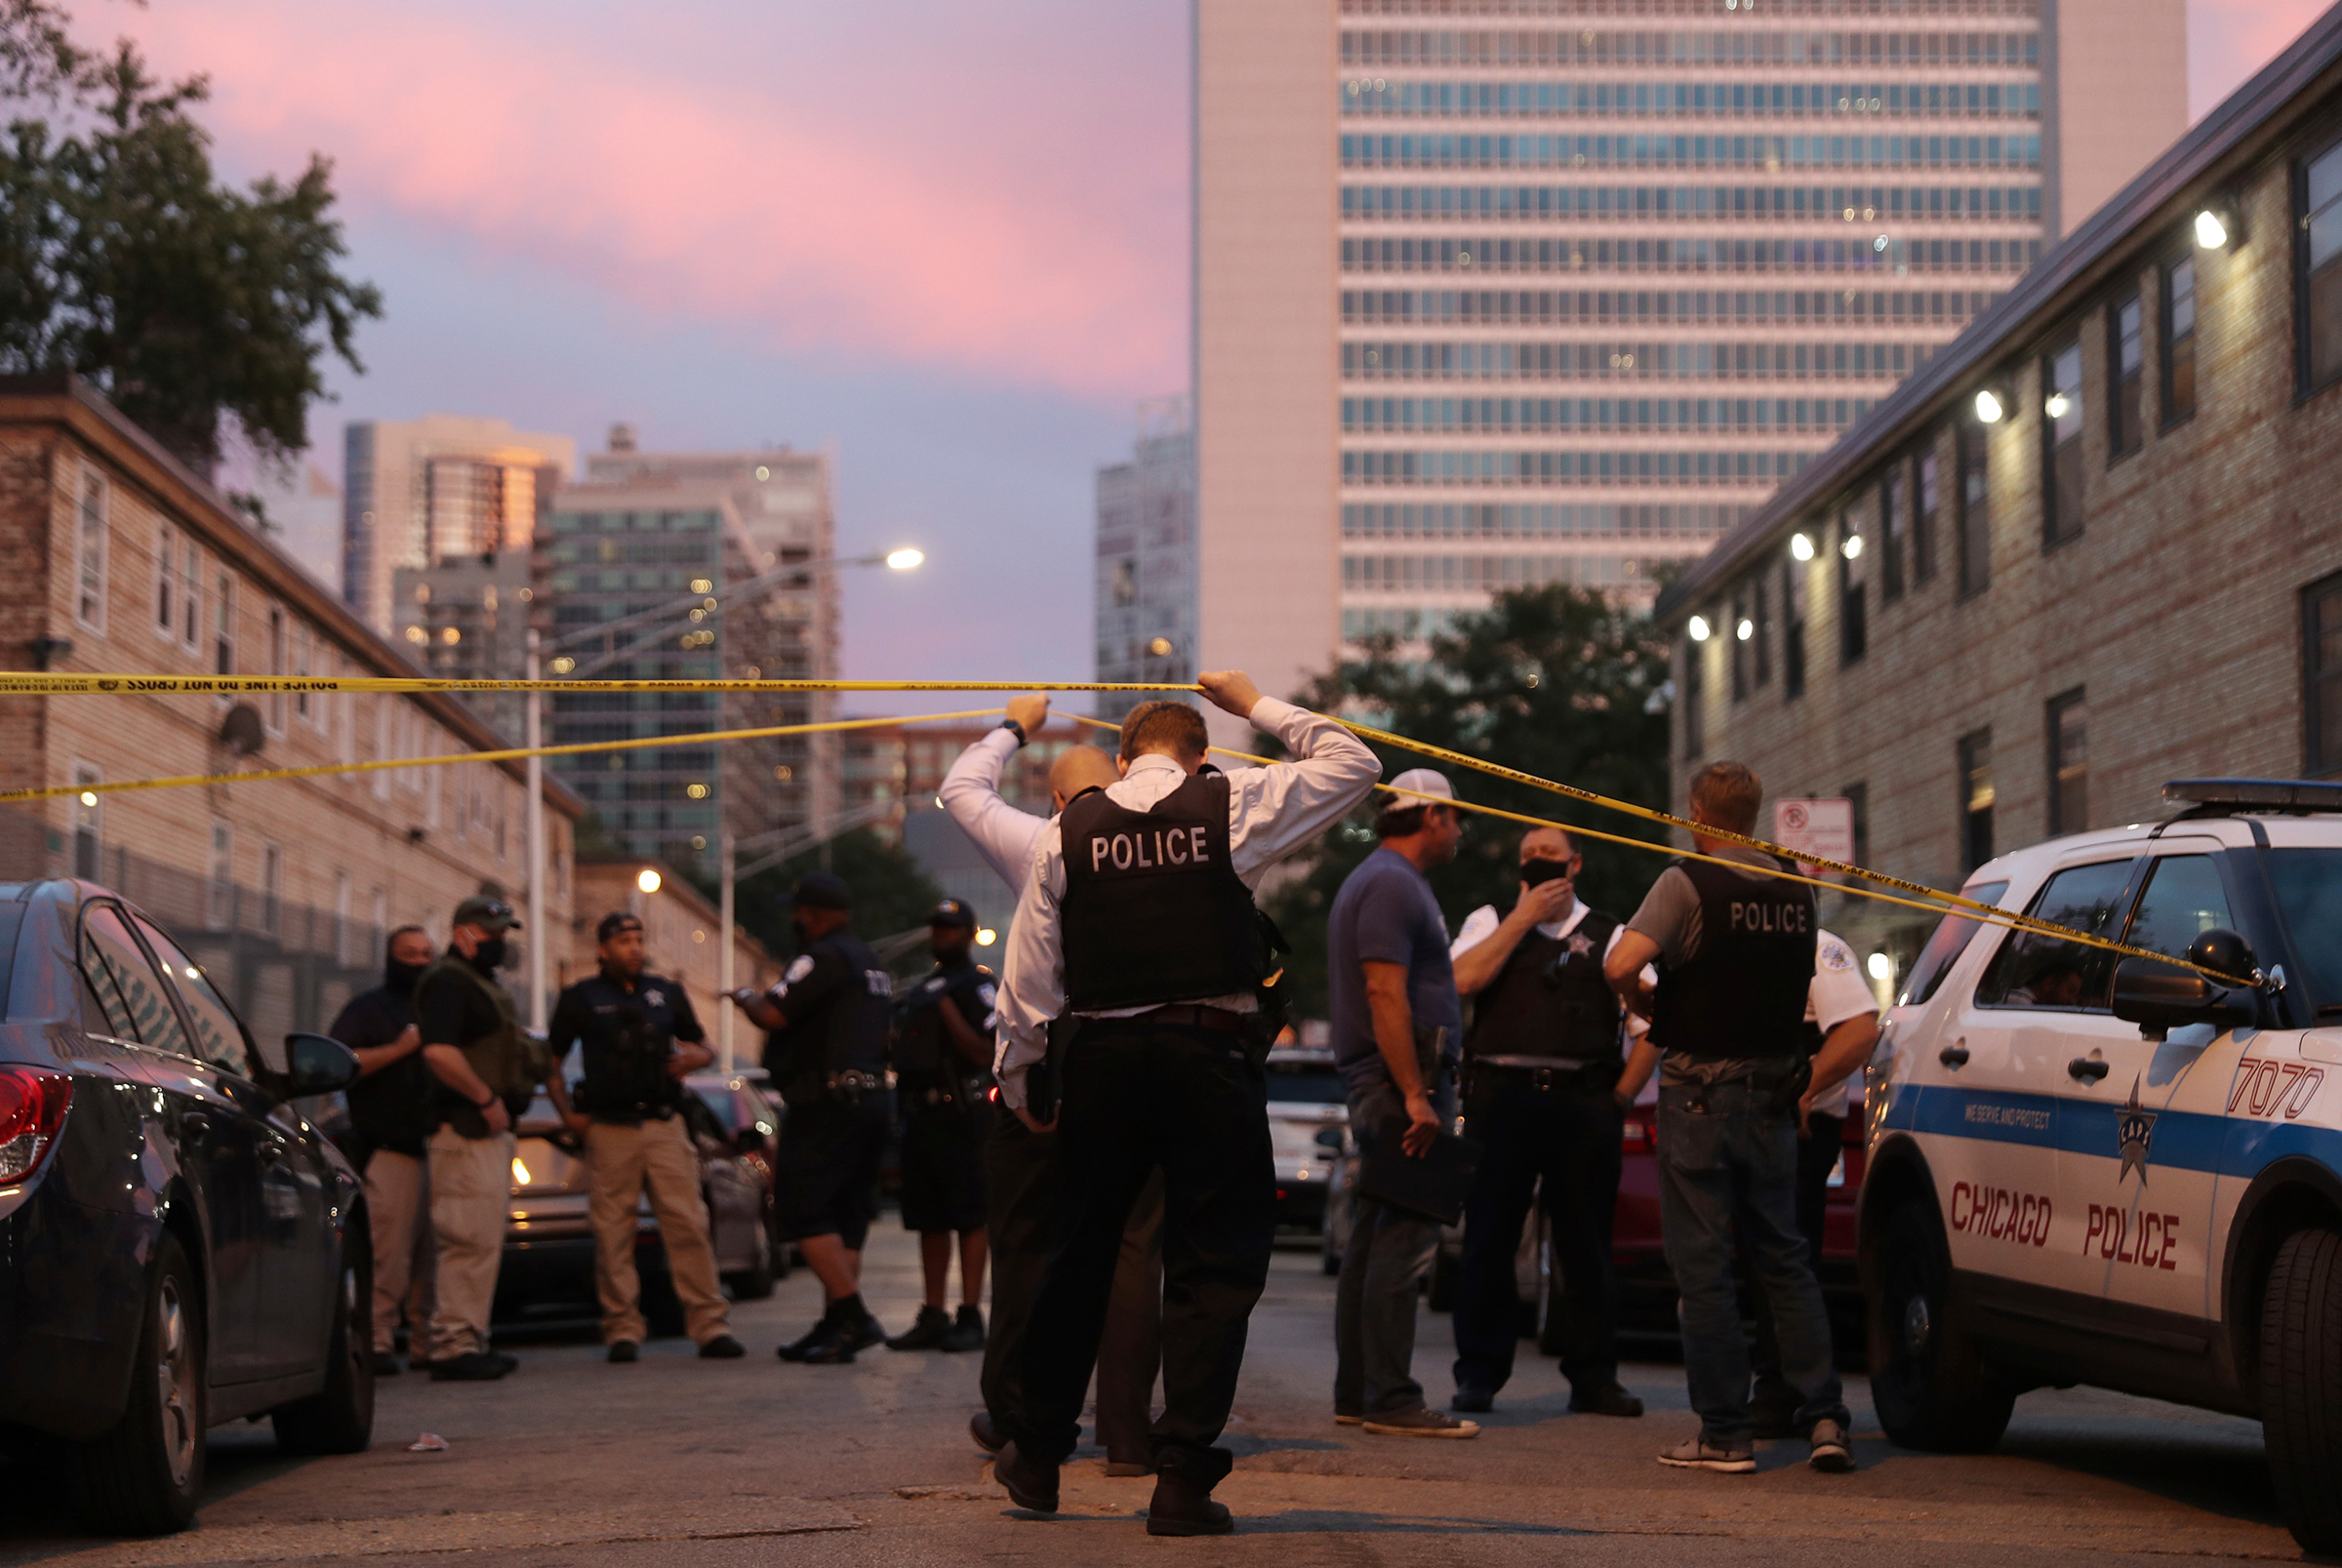 An unrelenting wave of deadly shootings has hit Chicago this summer amid the pandemic (John J. Kim—Chicago Tribune/AP)